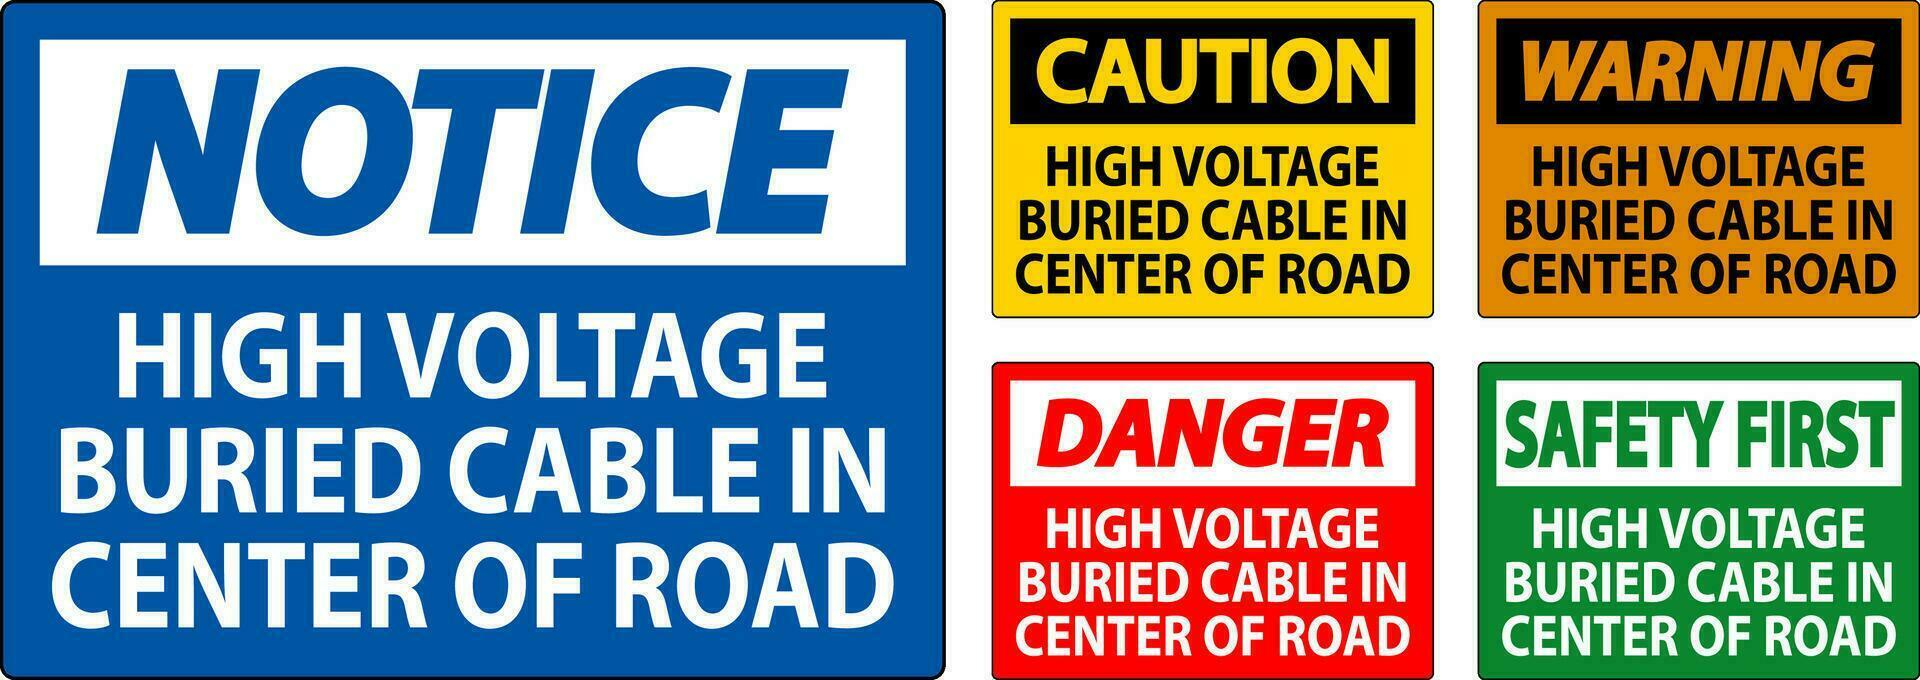 Danger Sign High Voltage Buried Cable In Center Of Road vector